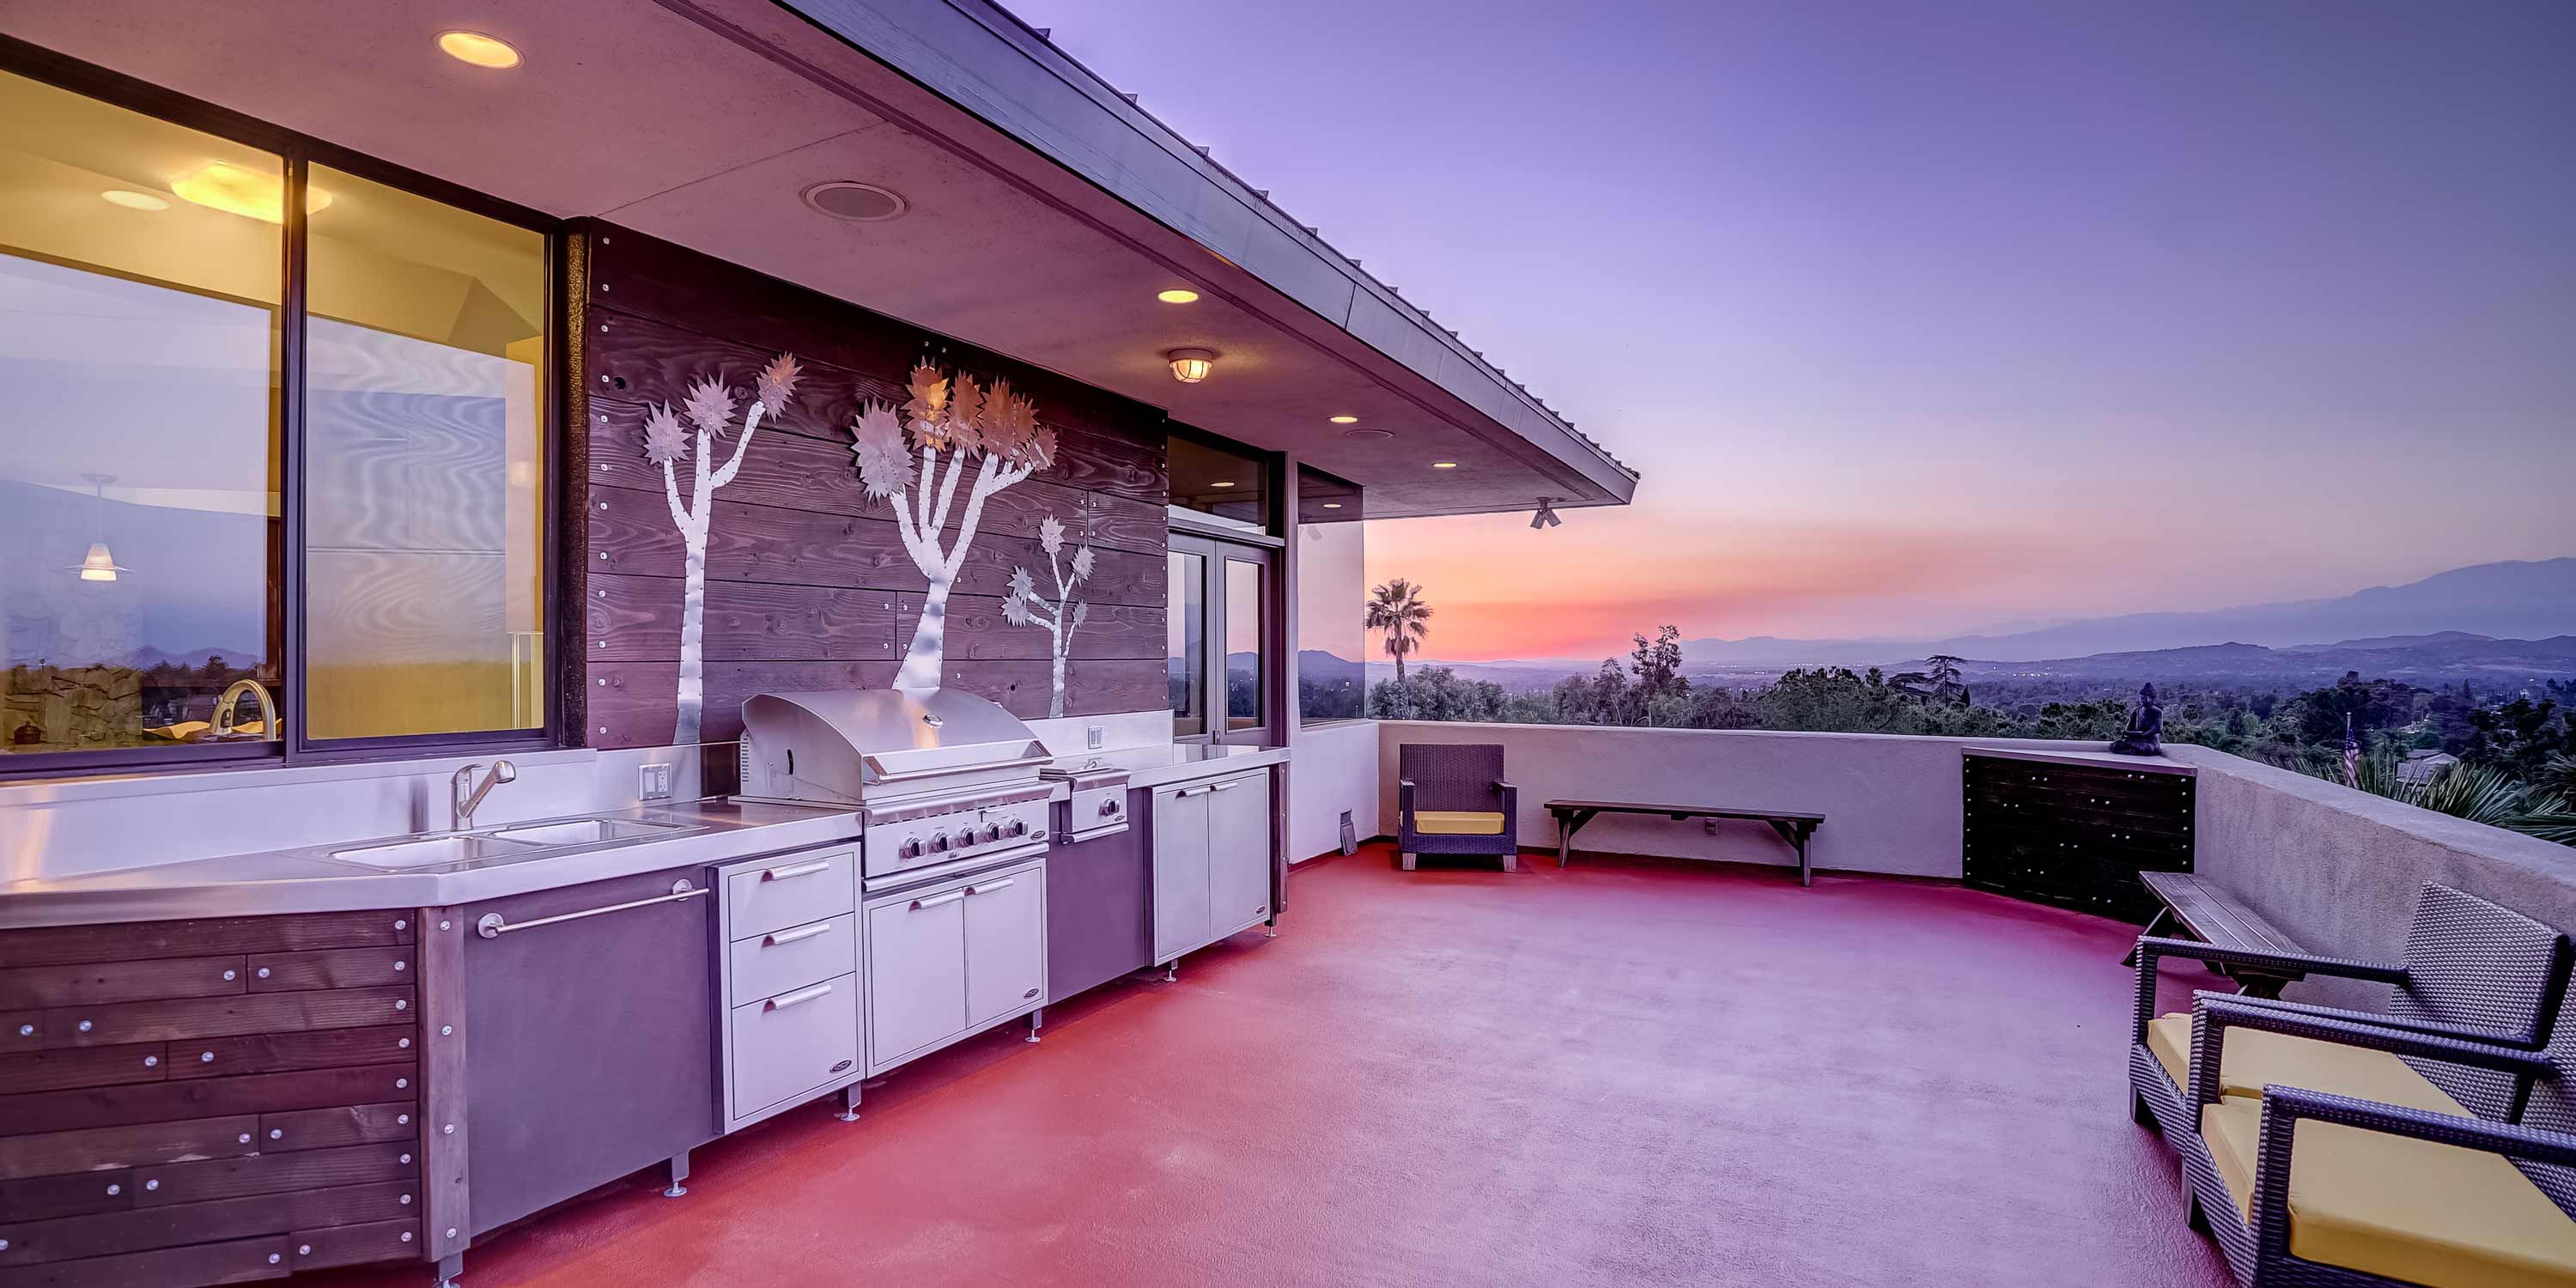 image of outdoor kitchen at dusk